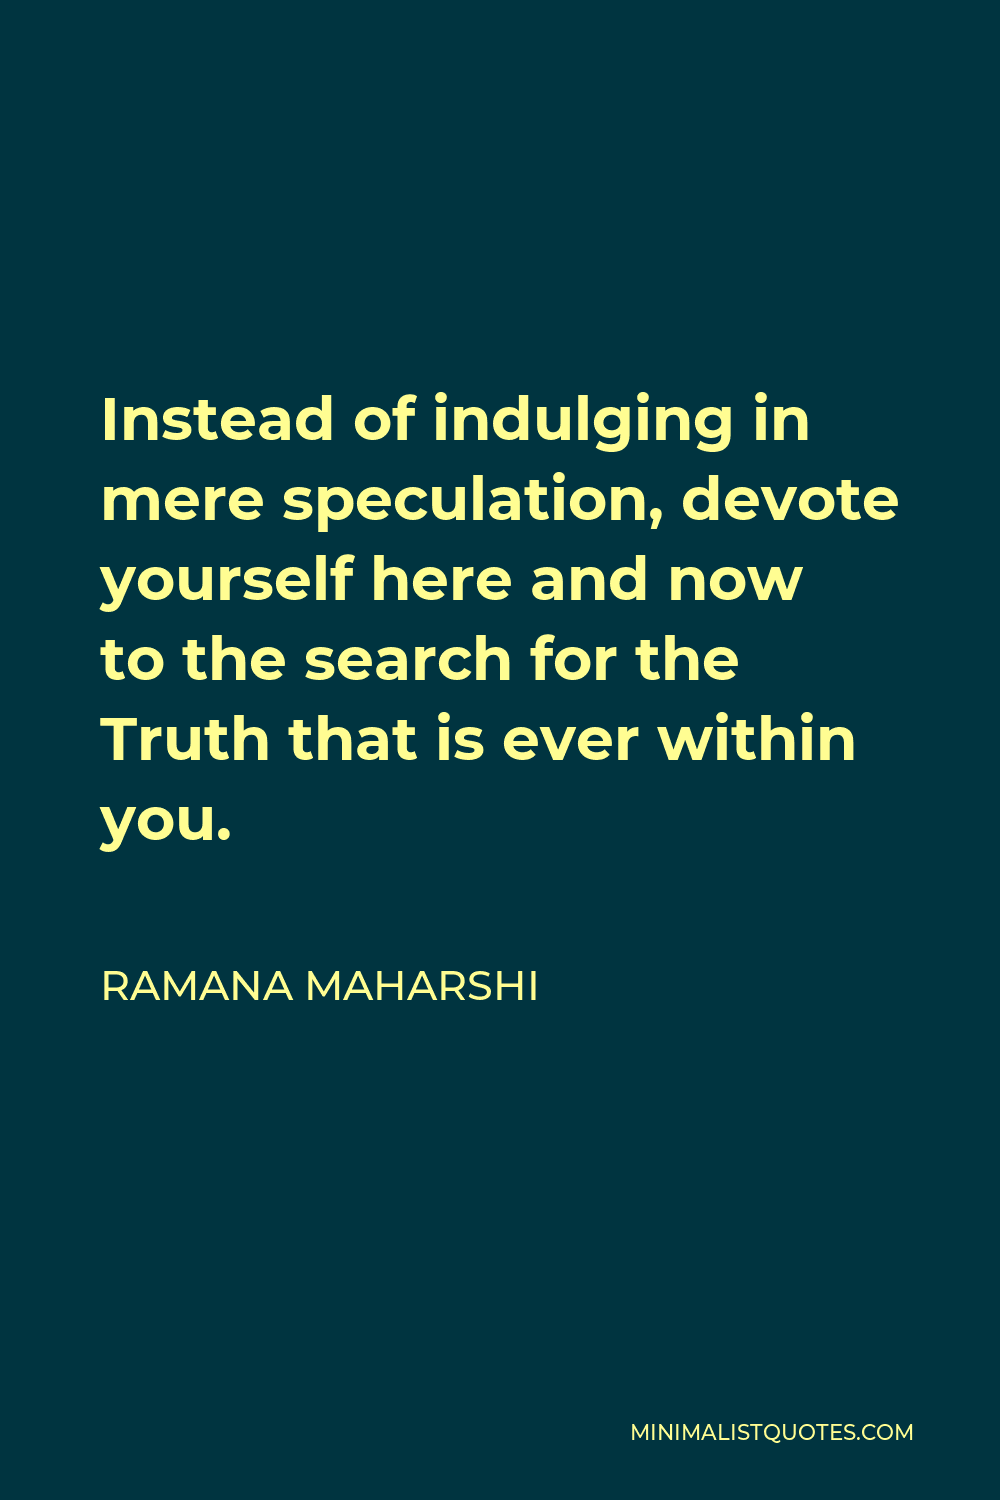 Ramana Maharshi Quote - Instead of indulging in mere speculation, devote yourself here and now to the search for the Truth that is ever within you.